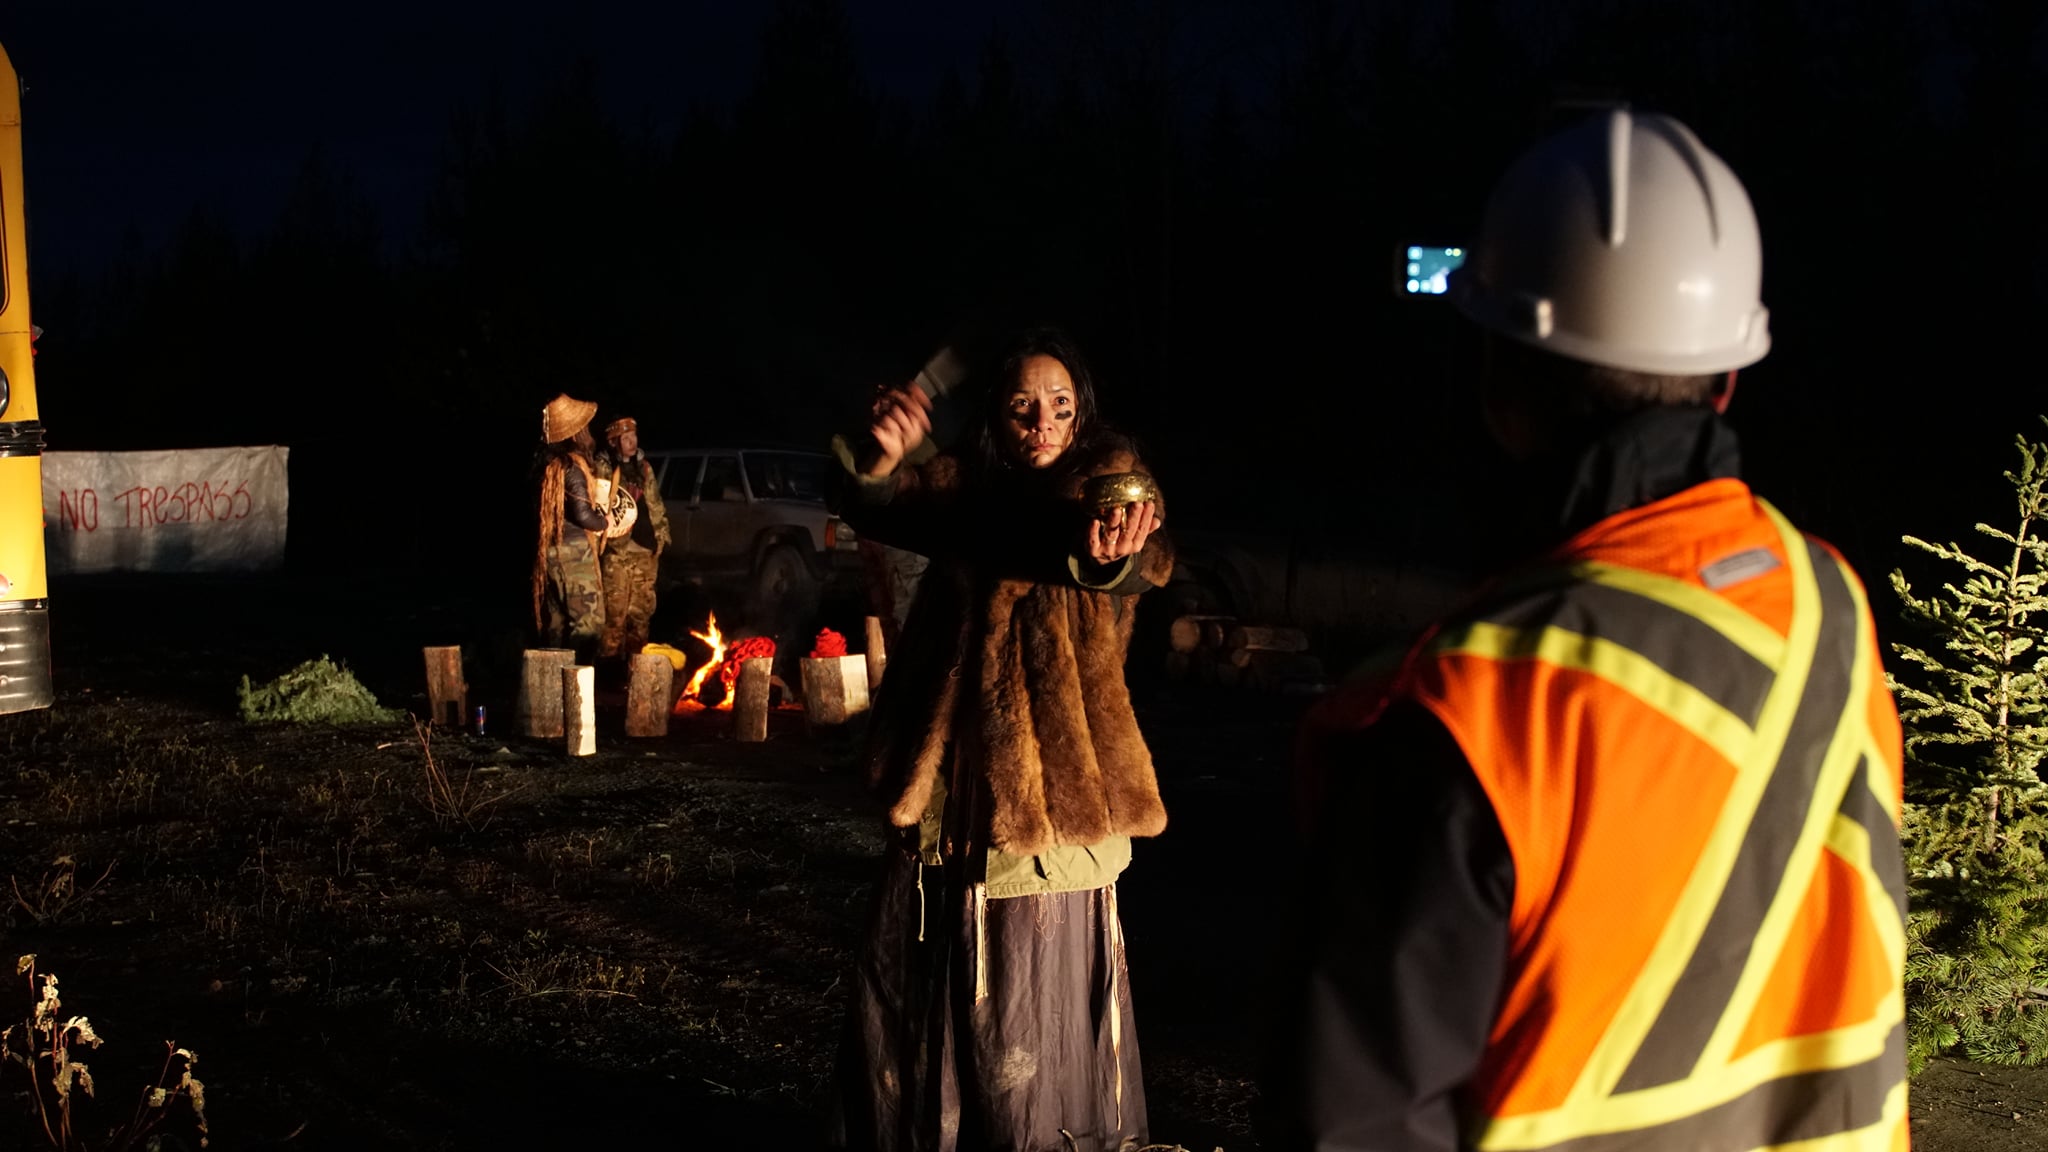 BREAKING: Wet’suwet’en Women Occupy Pipeline Drillsite To Stop CGL from Drilling Beneath Their Sacred Headwaters